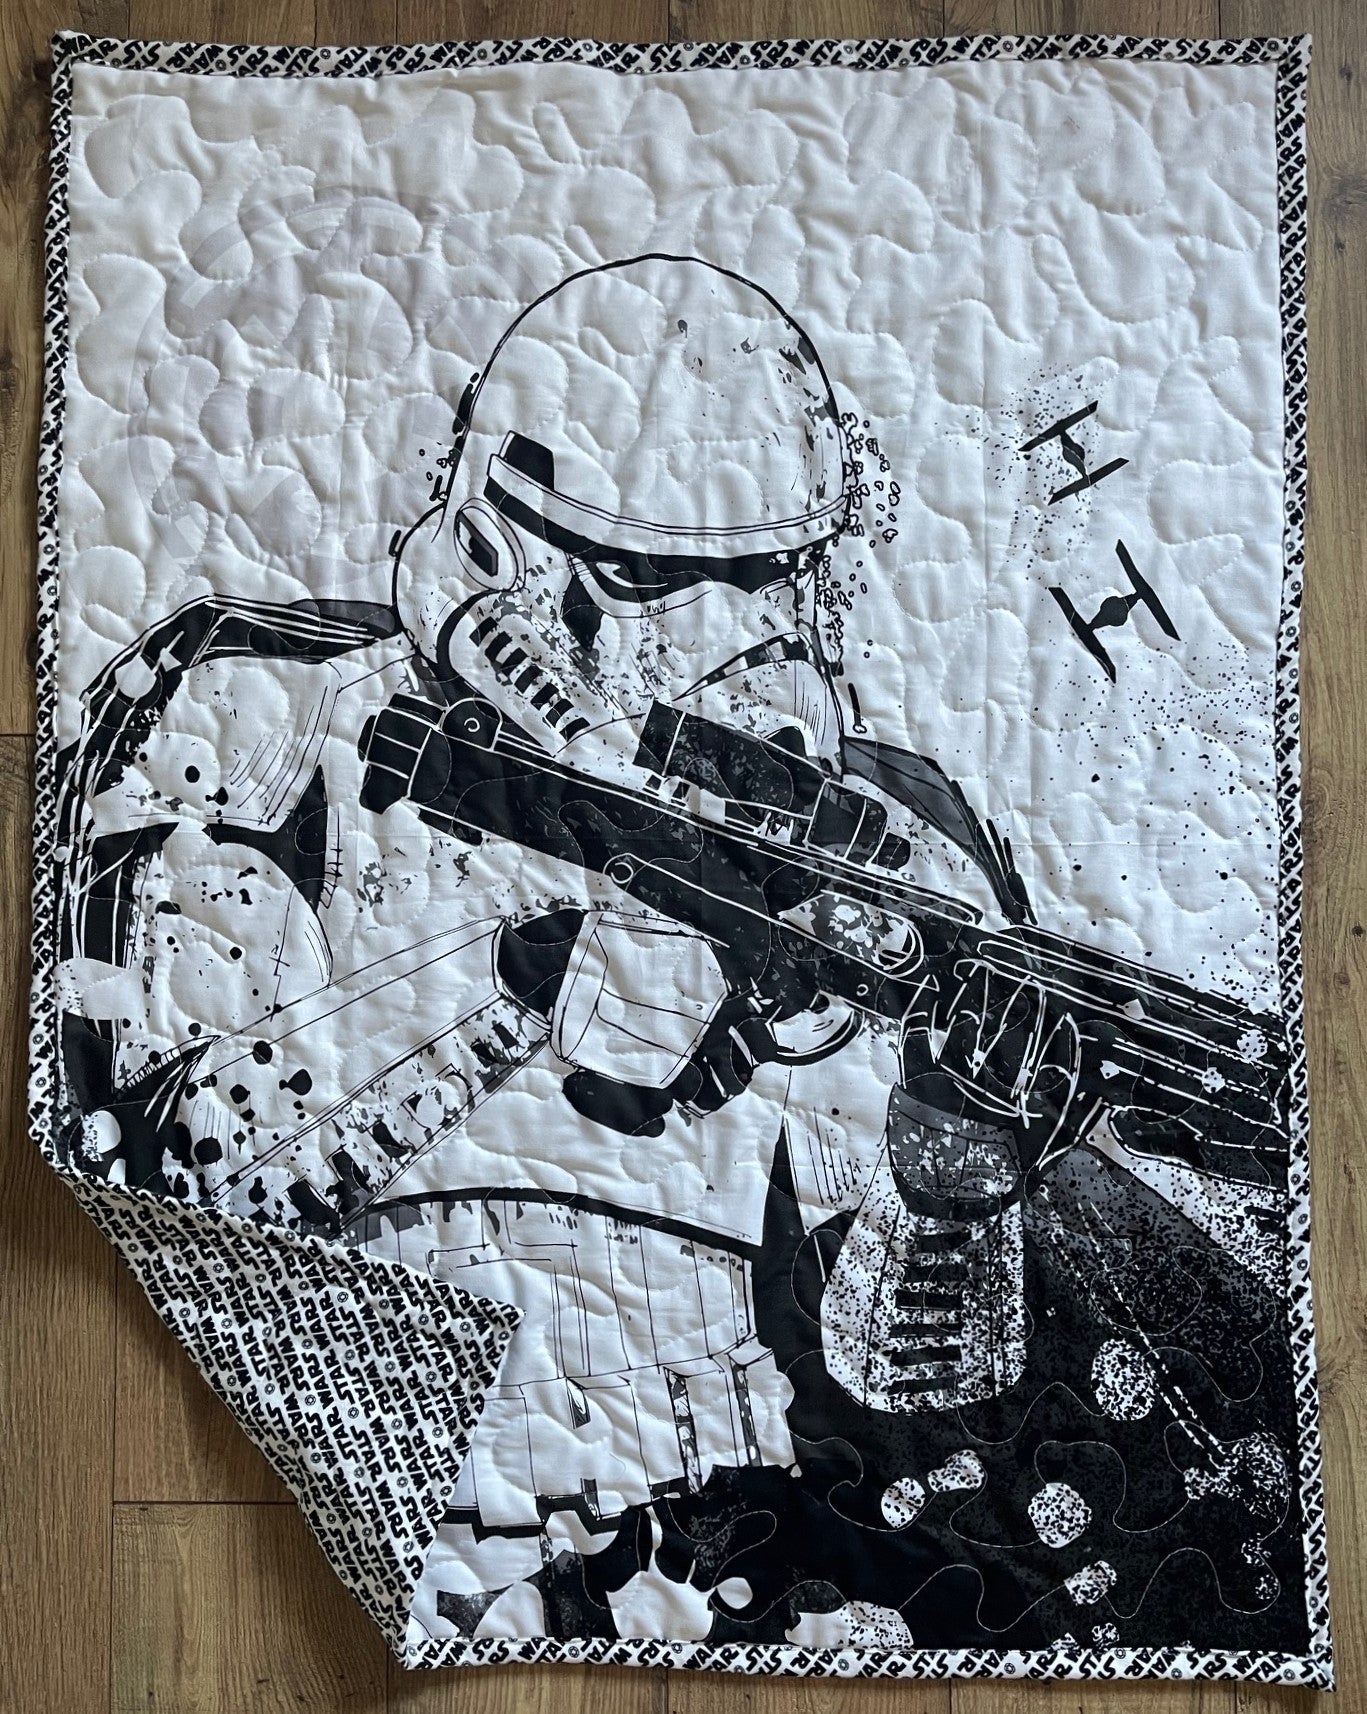 STAR WARS STORMTROOPER QUILTED BLANKET WITH SOFT FLANNEL BACKING